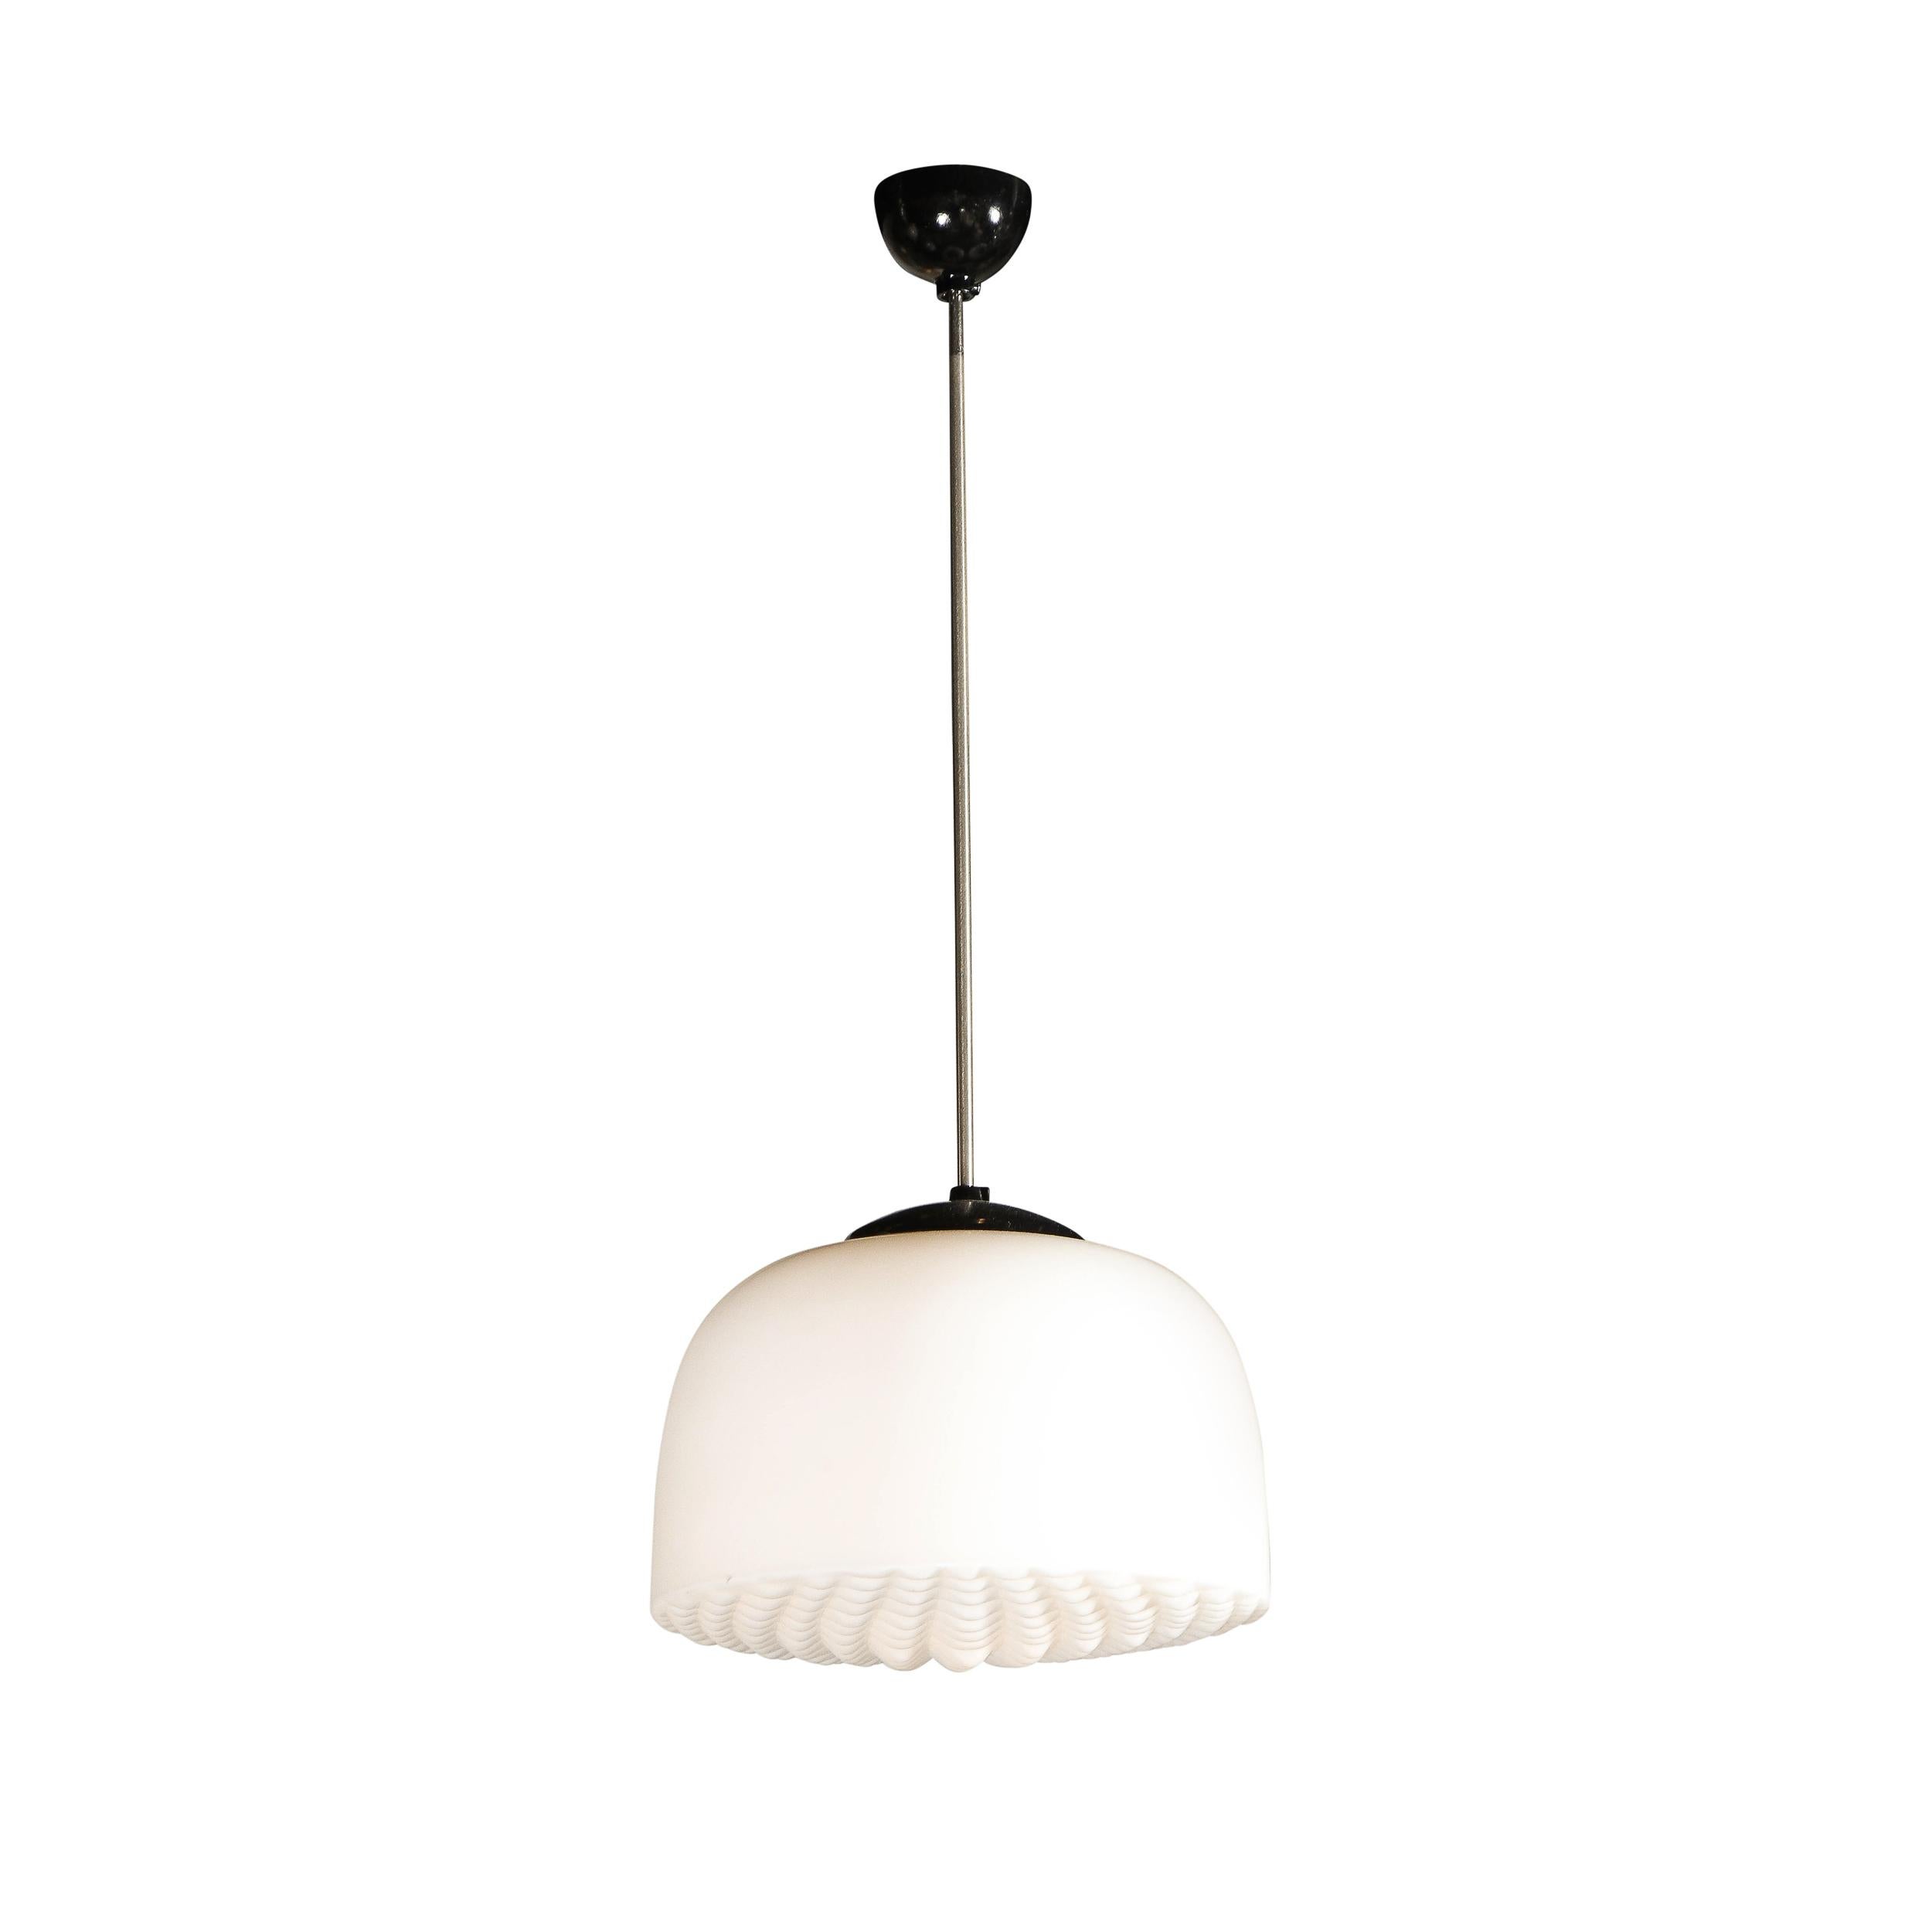 This refined pair of Mid-Century Modern pendants were realized in the Czech Republic circa 1950. The feature graphic domed shades with a rectilinear 